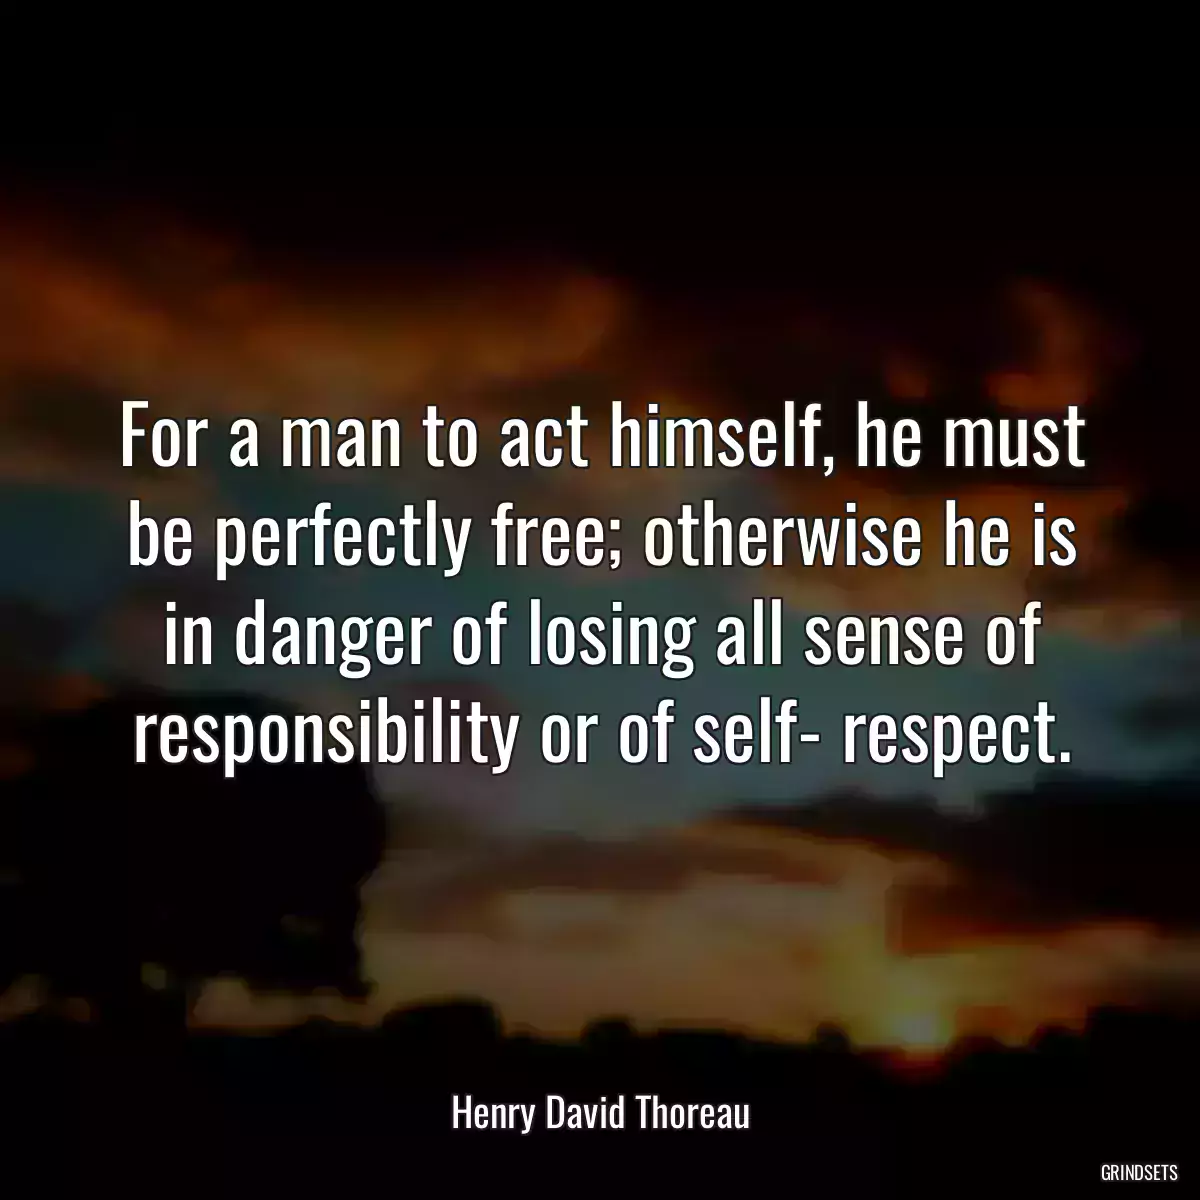 For a man to act himself, he must be perfectly free; otherwise he is in danger of losing all sense of responsibility or of self- respect.